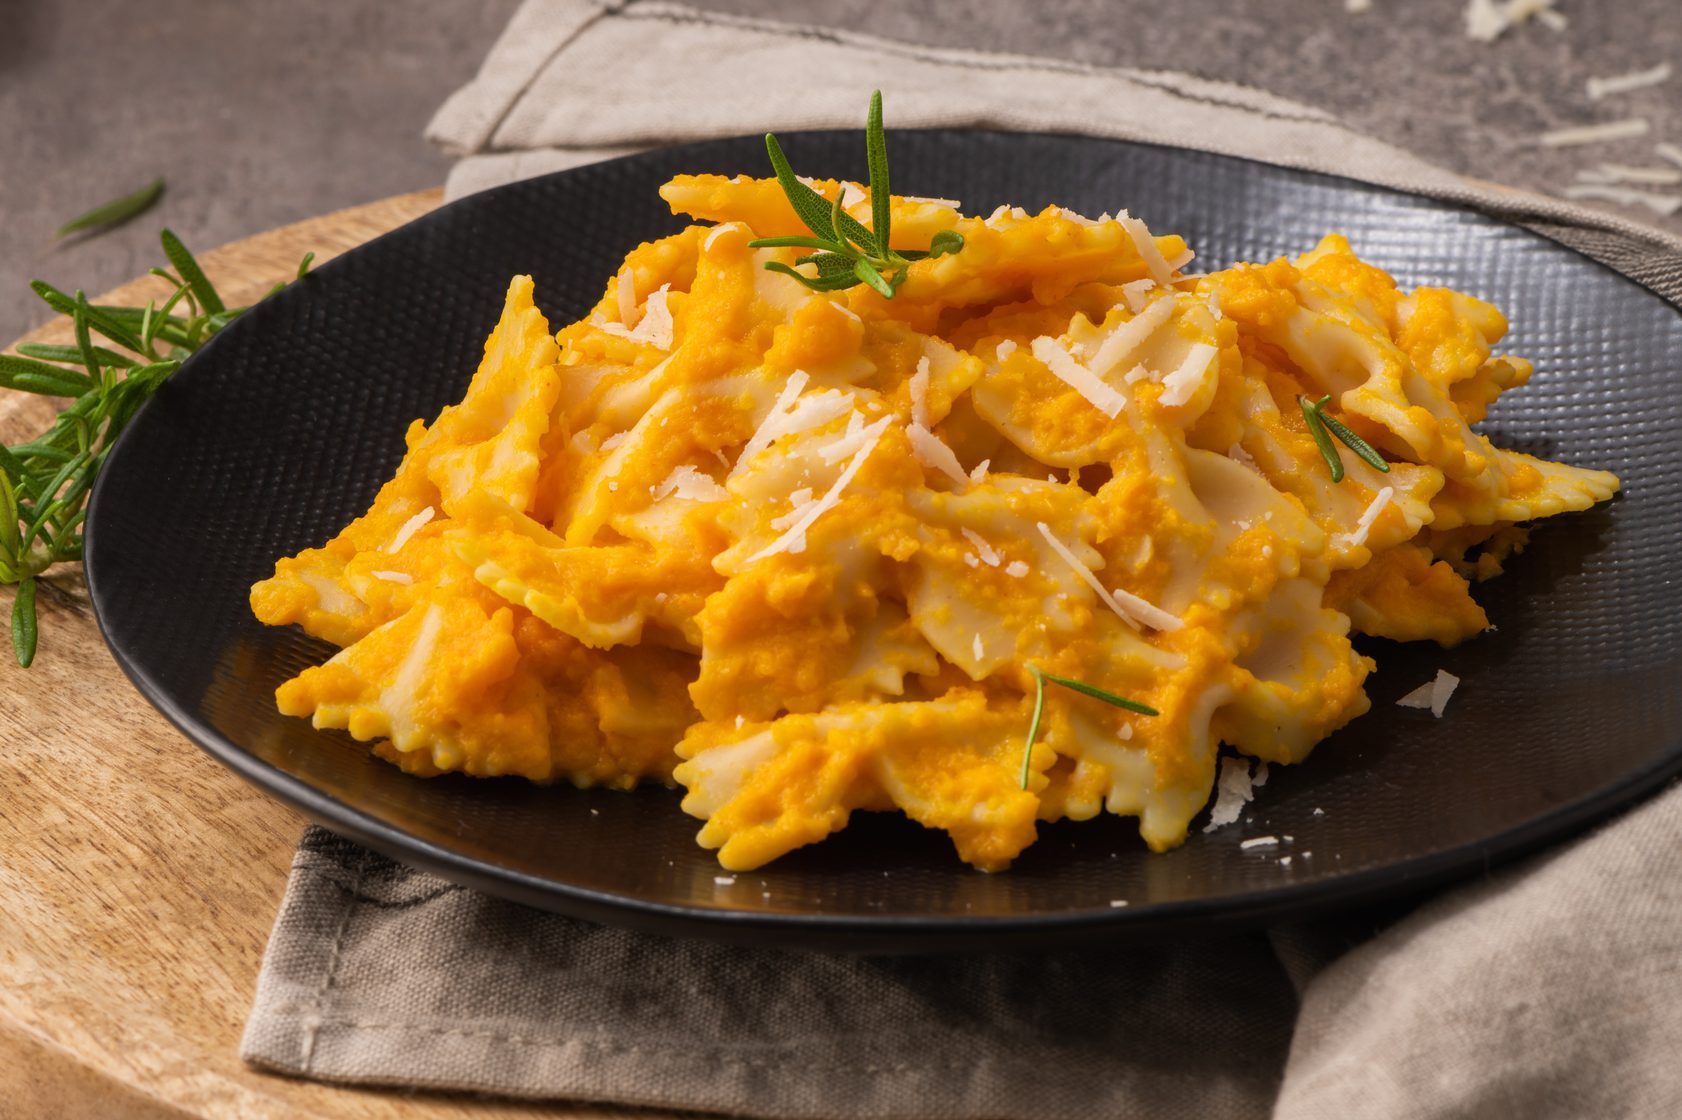 Farfalle pasta with pumpkin sauce and parmesan cheese decorated with rosemary on a black ceramic plate. Creamy cheesy vegan pumpkin pasta. Kitchen counter top.